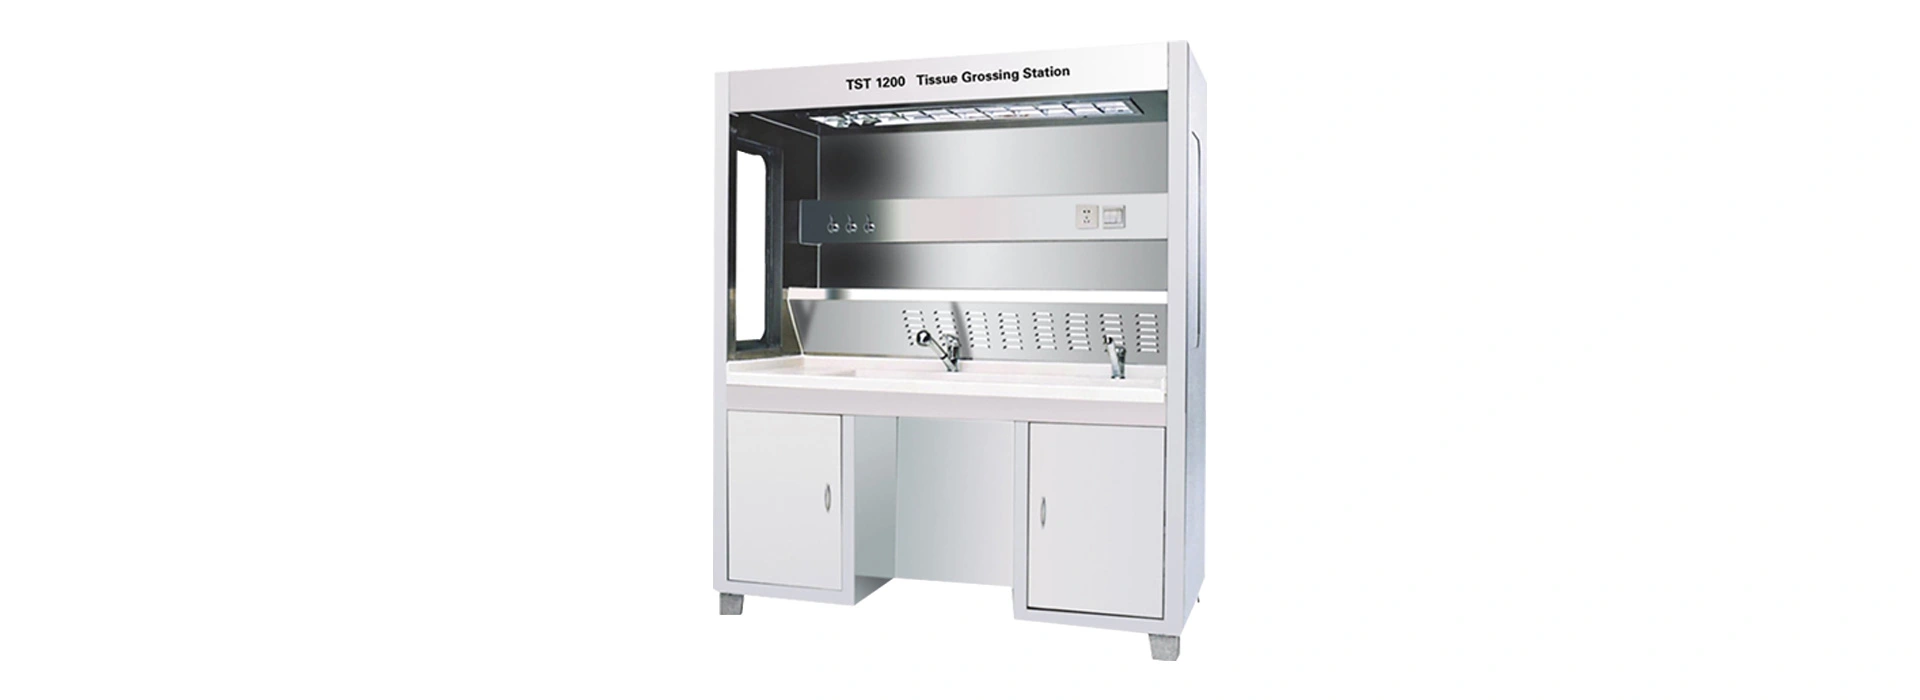 The Need for Medical Cabinets in Storing Histology Equipment